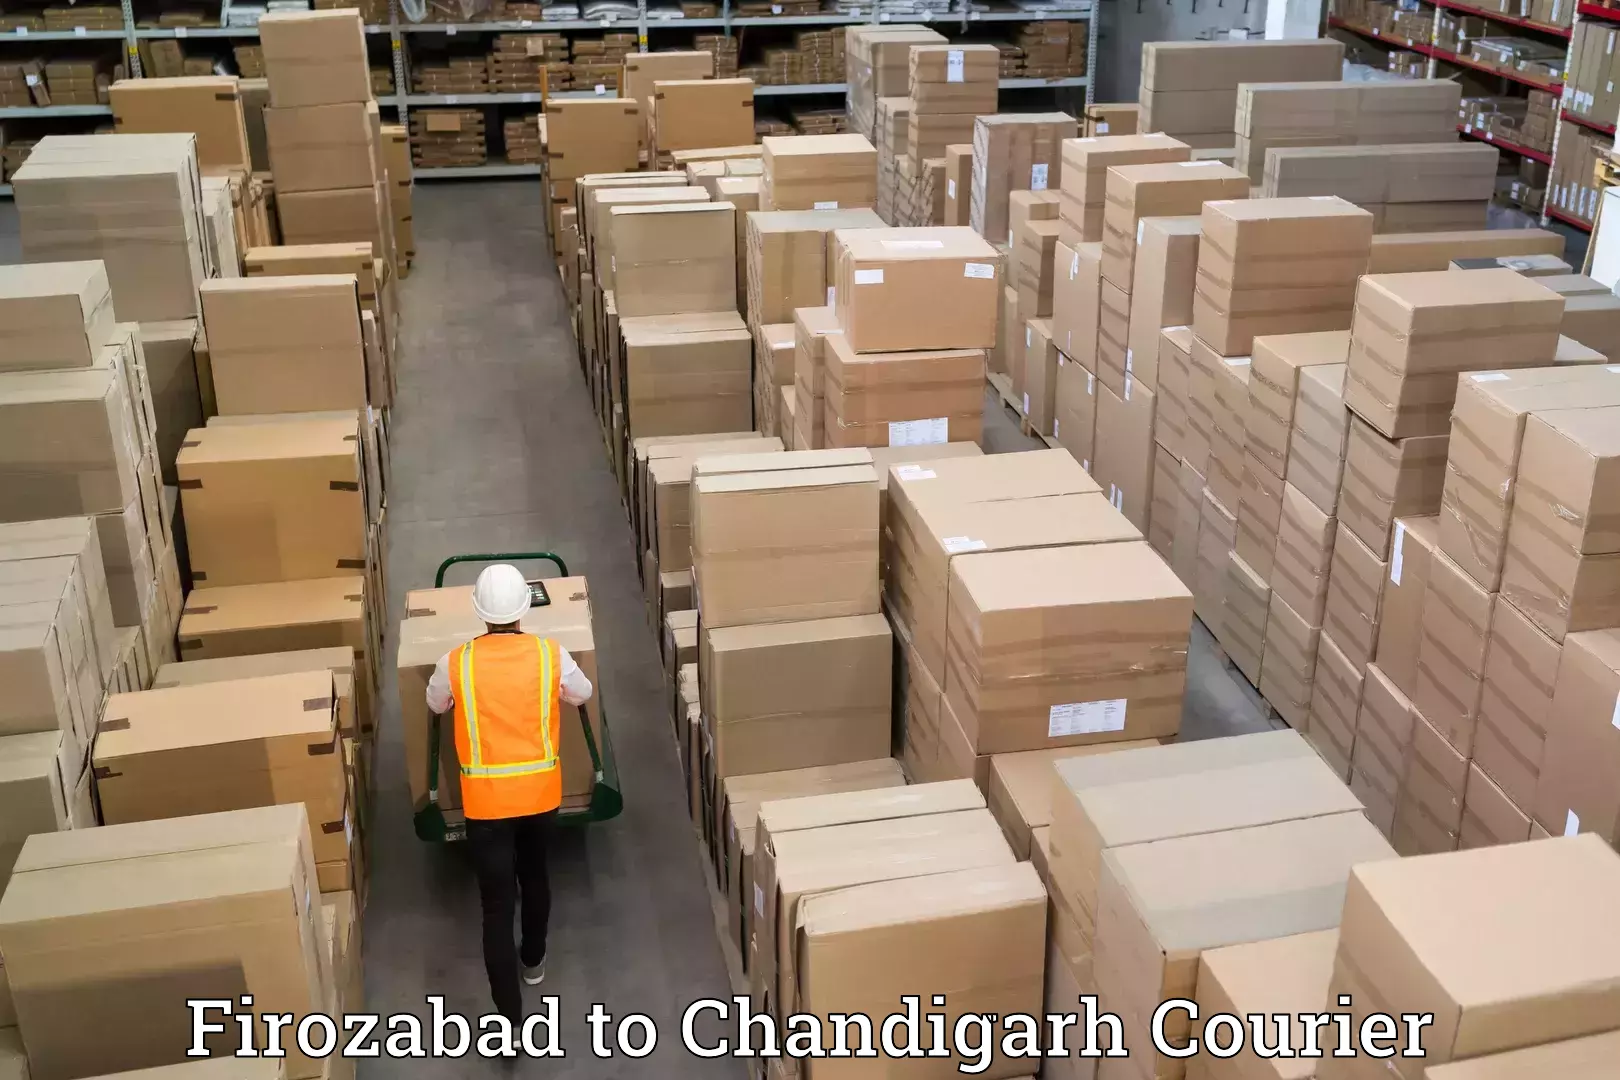 Moving and packing experts Firozabad to Chandigarh